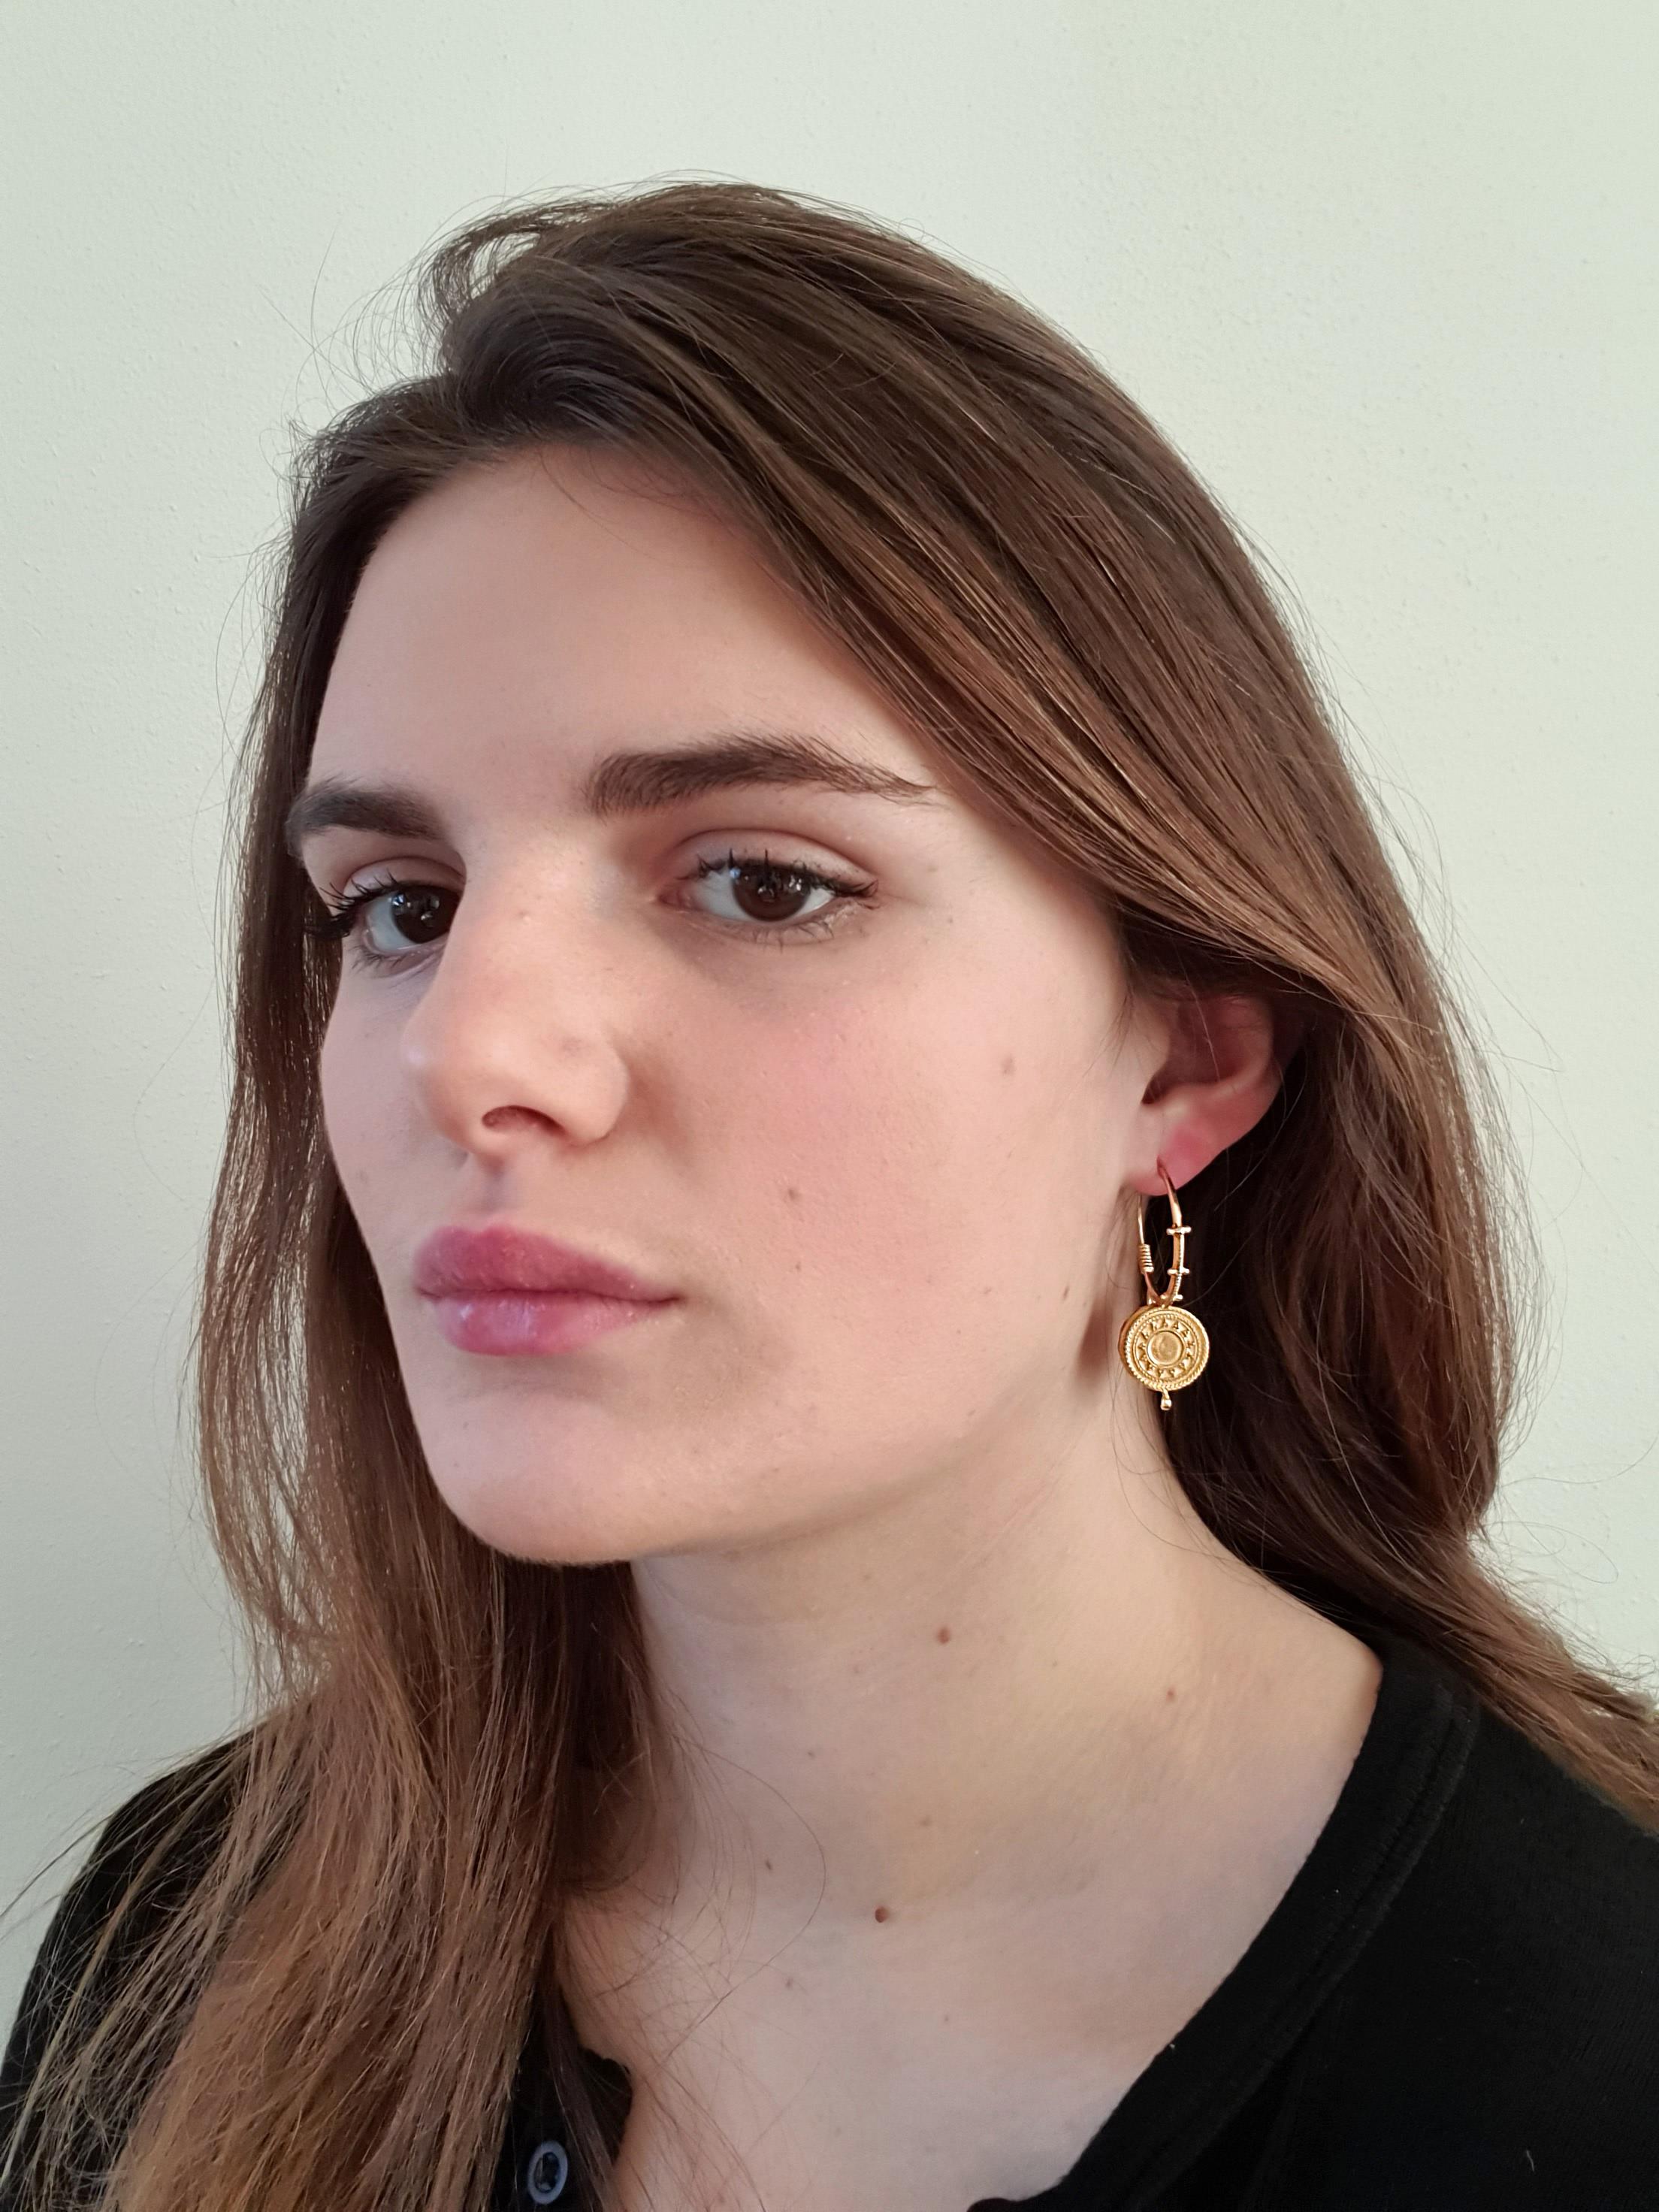 A Replication of Early Medieval Basket Earring in 22 kt yellow gold.ù
The earrings are completely hand made in our atelier in Italy Como with a rigorous quality workmanship .
The original earrings dating  6th - 7th century AD are located at the Como